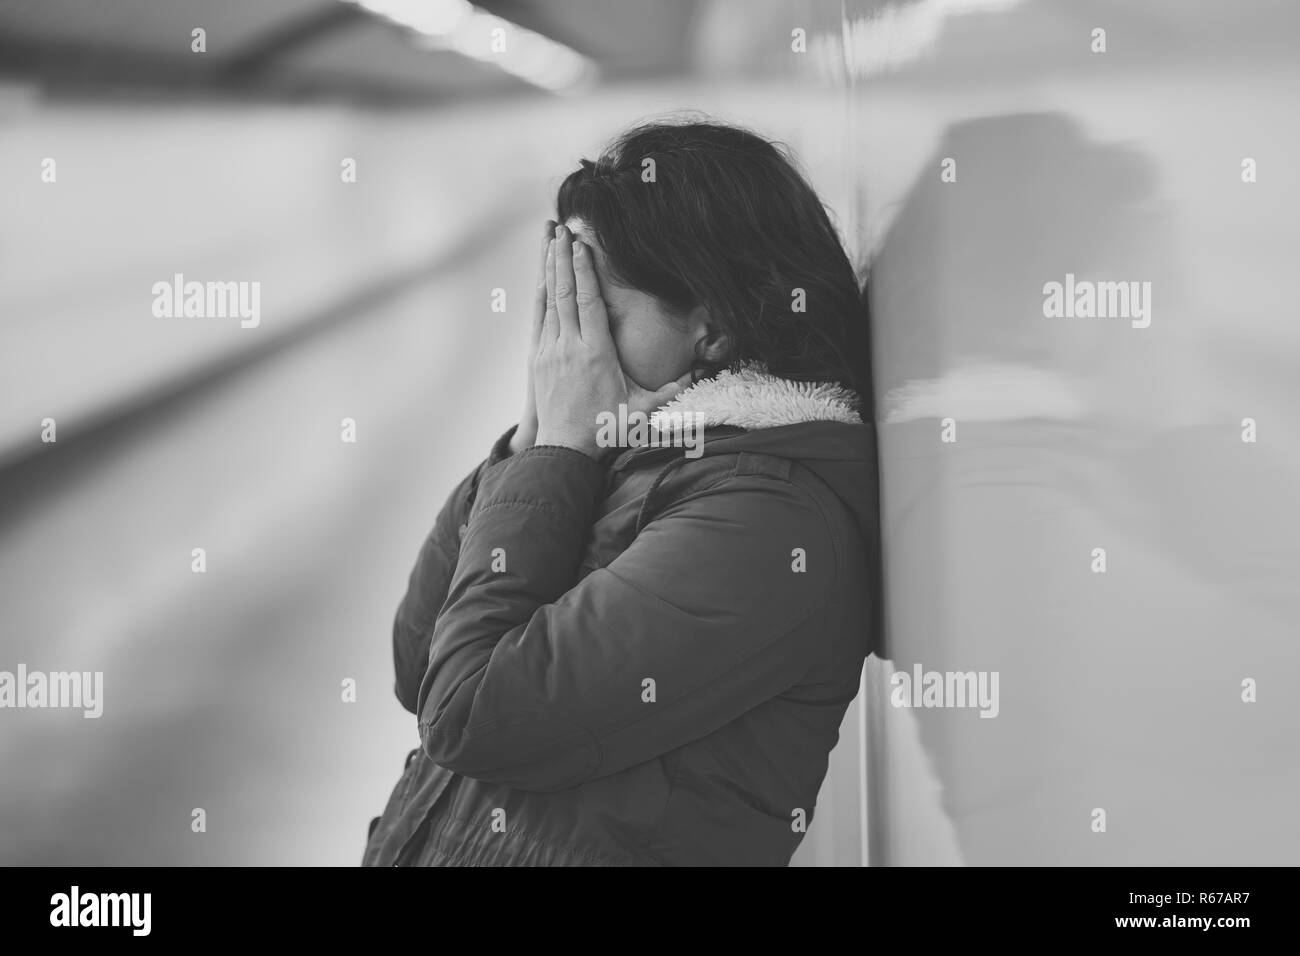 Unhappy young woman suffering from depression and stress feeling miserable lonely and hopeless in Emotional pain Mental health Work-life balance issue Stock Photo